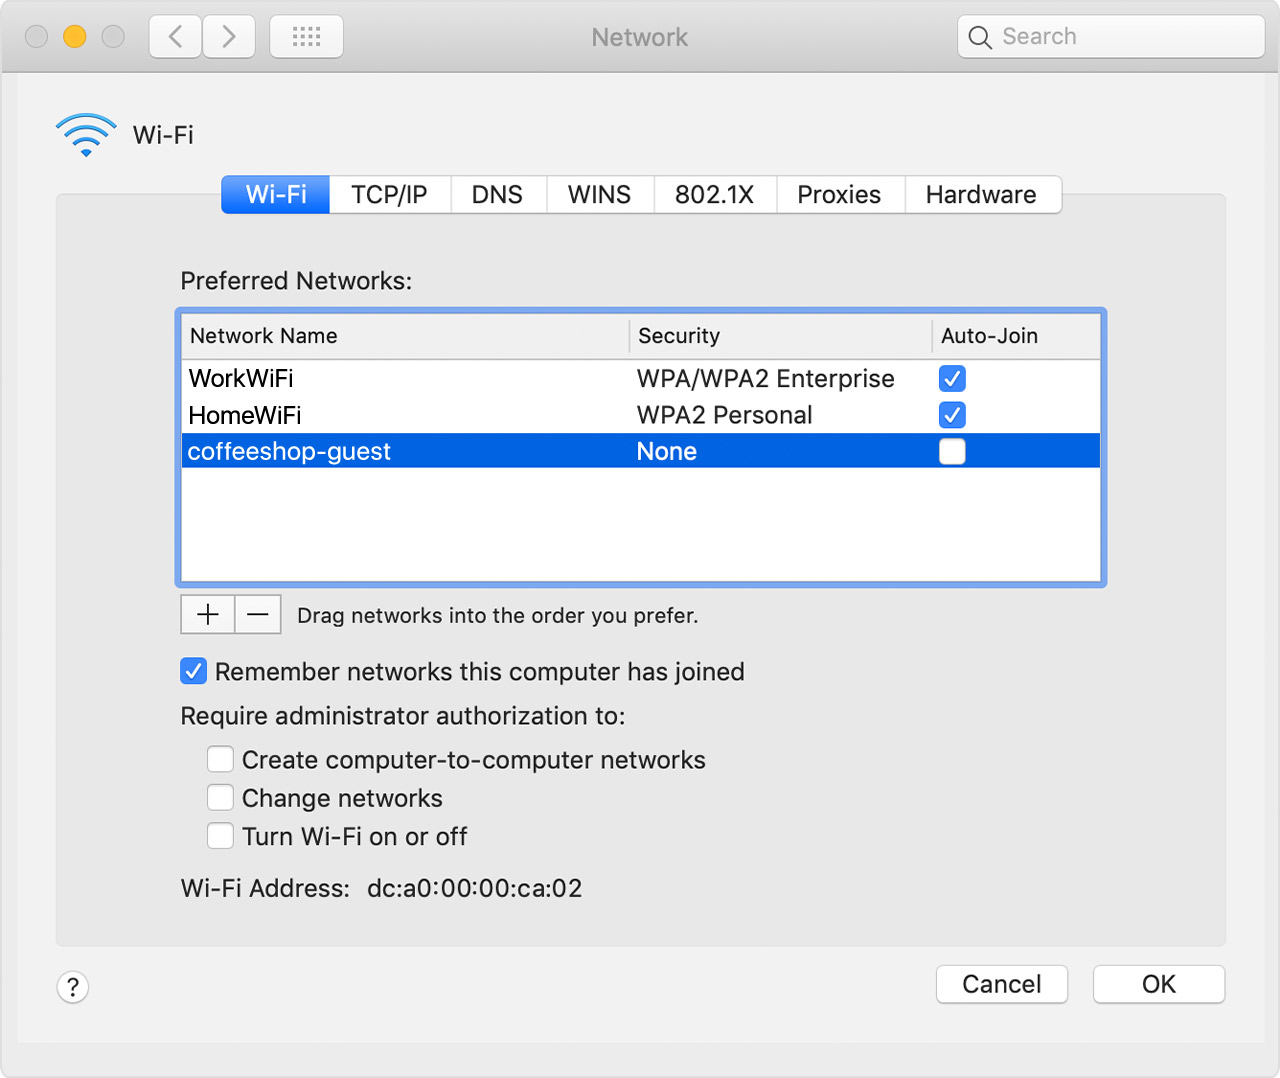 Screenshot showing selecting the Wi-Fi network you want to forget in the Preferred Networks list